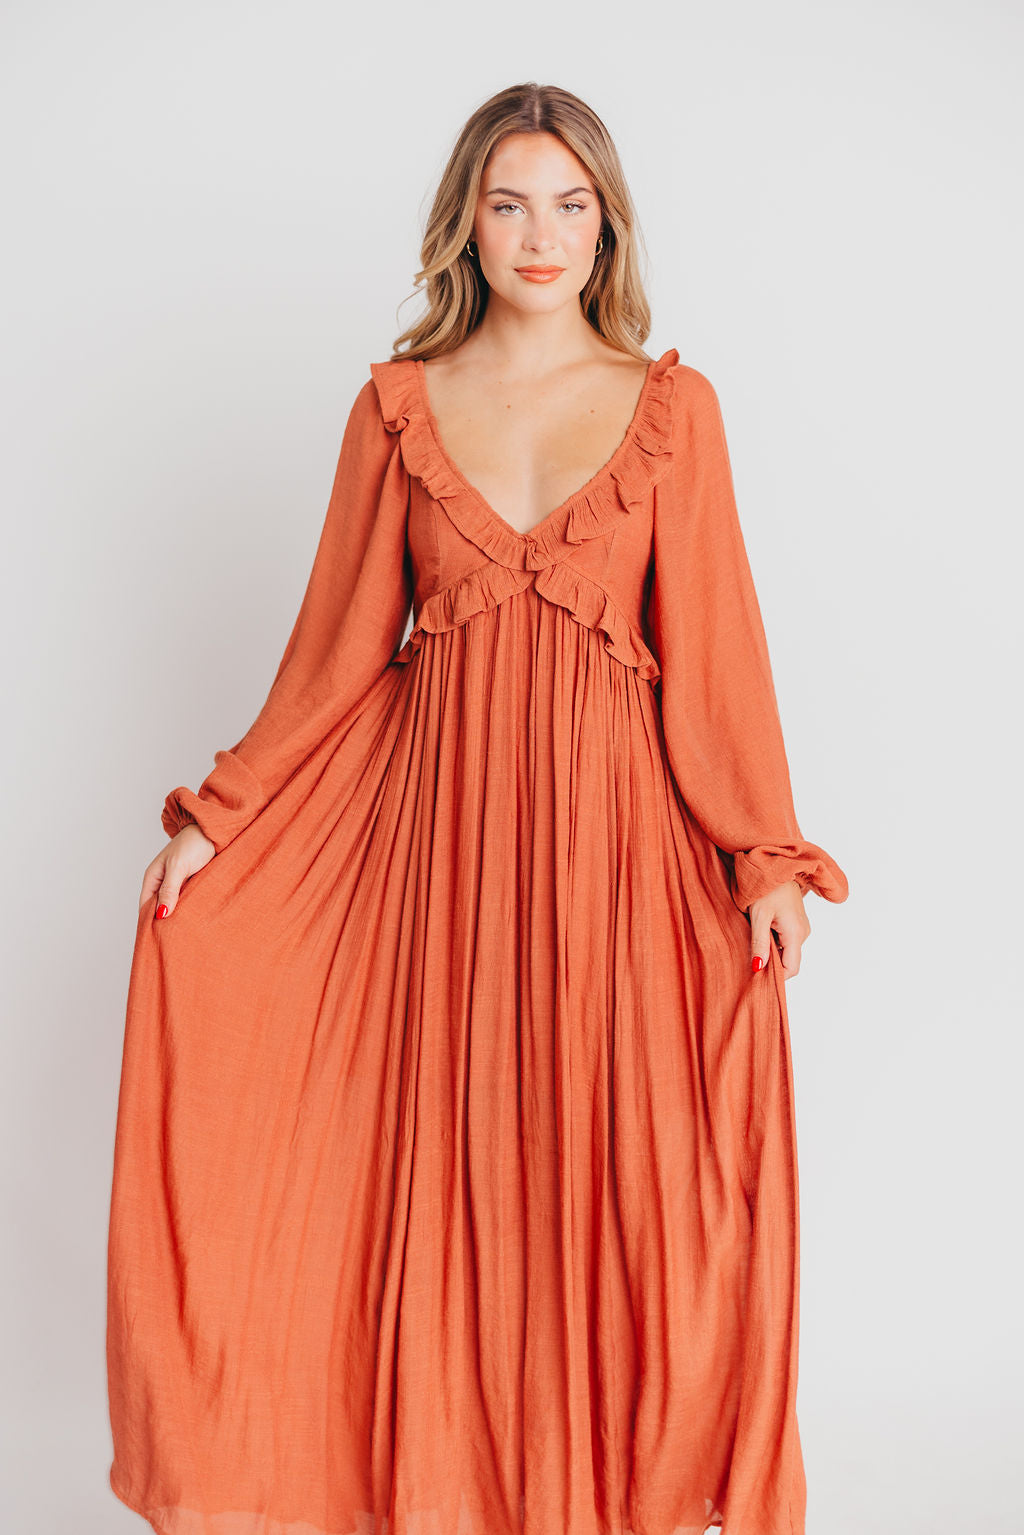 FINAL FEW! Let It Be Ruffled Maxi Dress with Plunging Neckline in Terracotta - Bump Friendly - INCLUSIVE SIZING S-2XL (Cannot Restock)